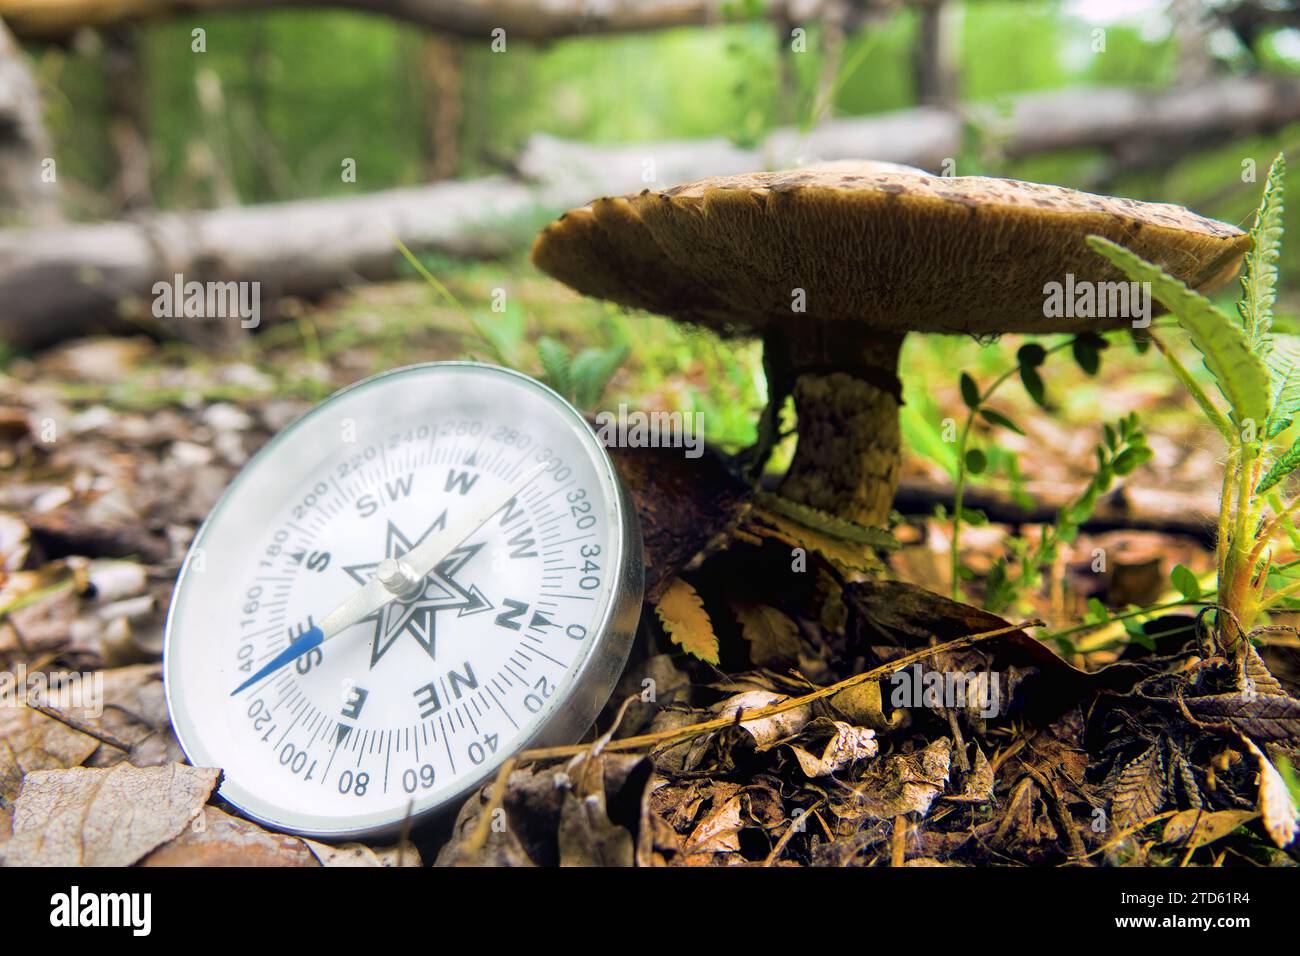 The right compass is always needed for travelers, adequate course. Mushroom pickers will not get lost Stock Photo